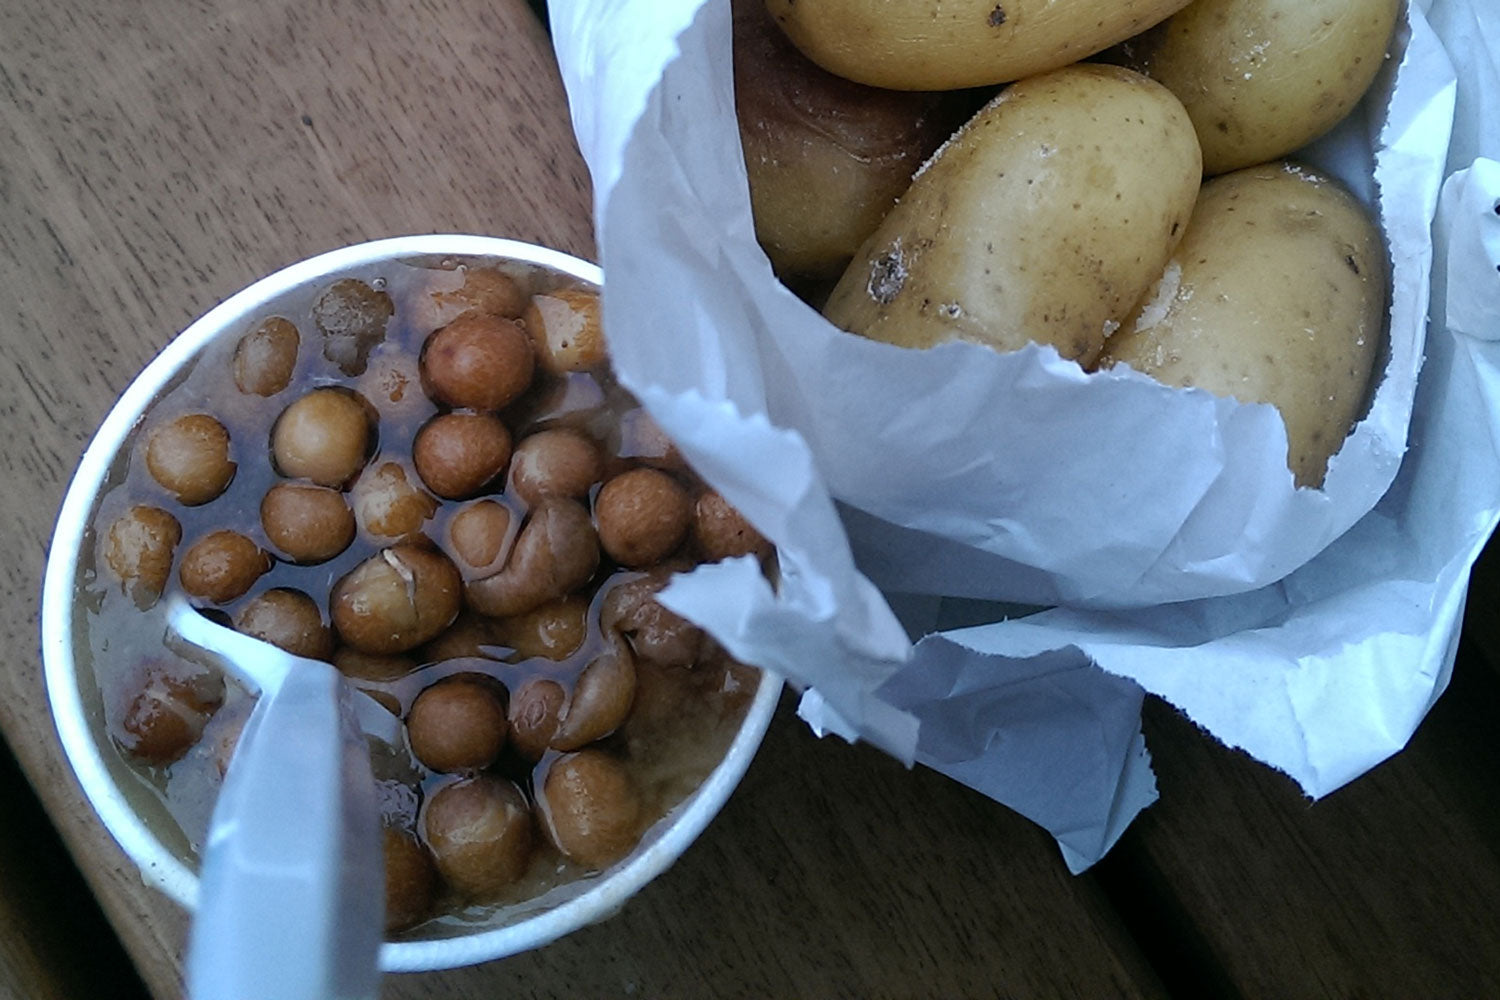 Parched Peas and a bag of potatoes at Preston Flag Market